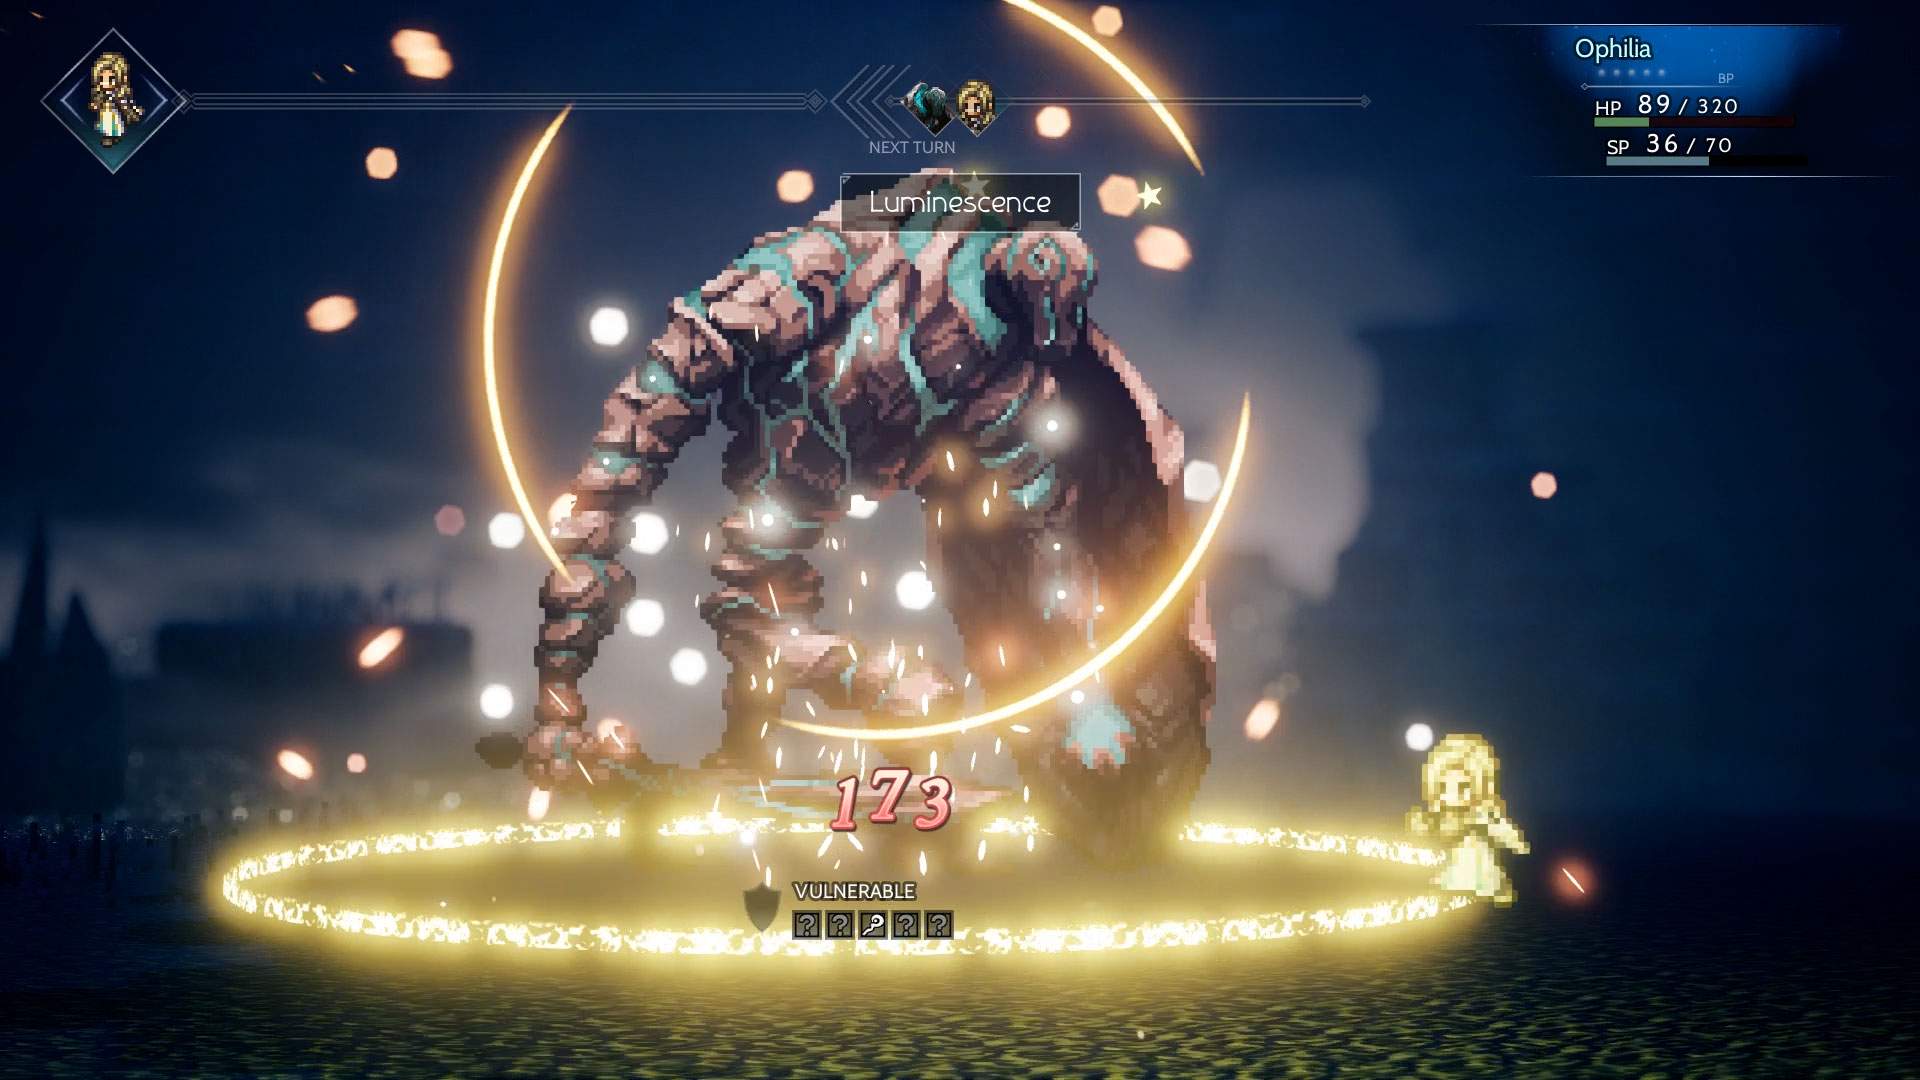 In game battle screenshot showing Ophilia casting an attack on a large monster in dark environment